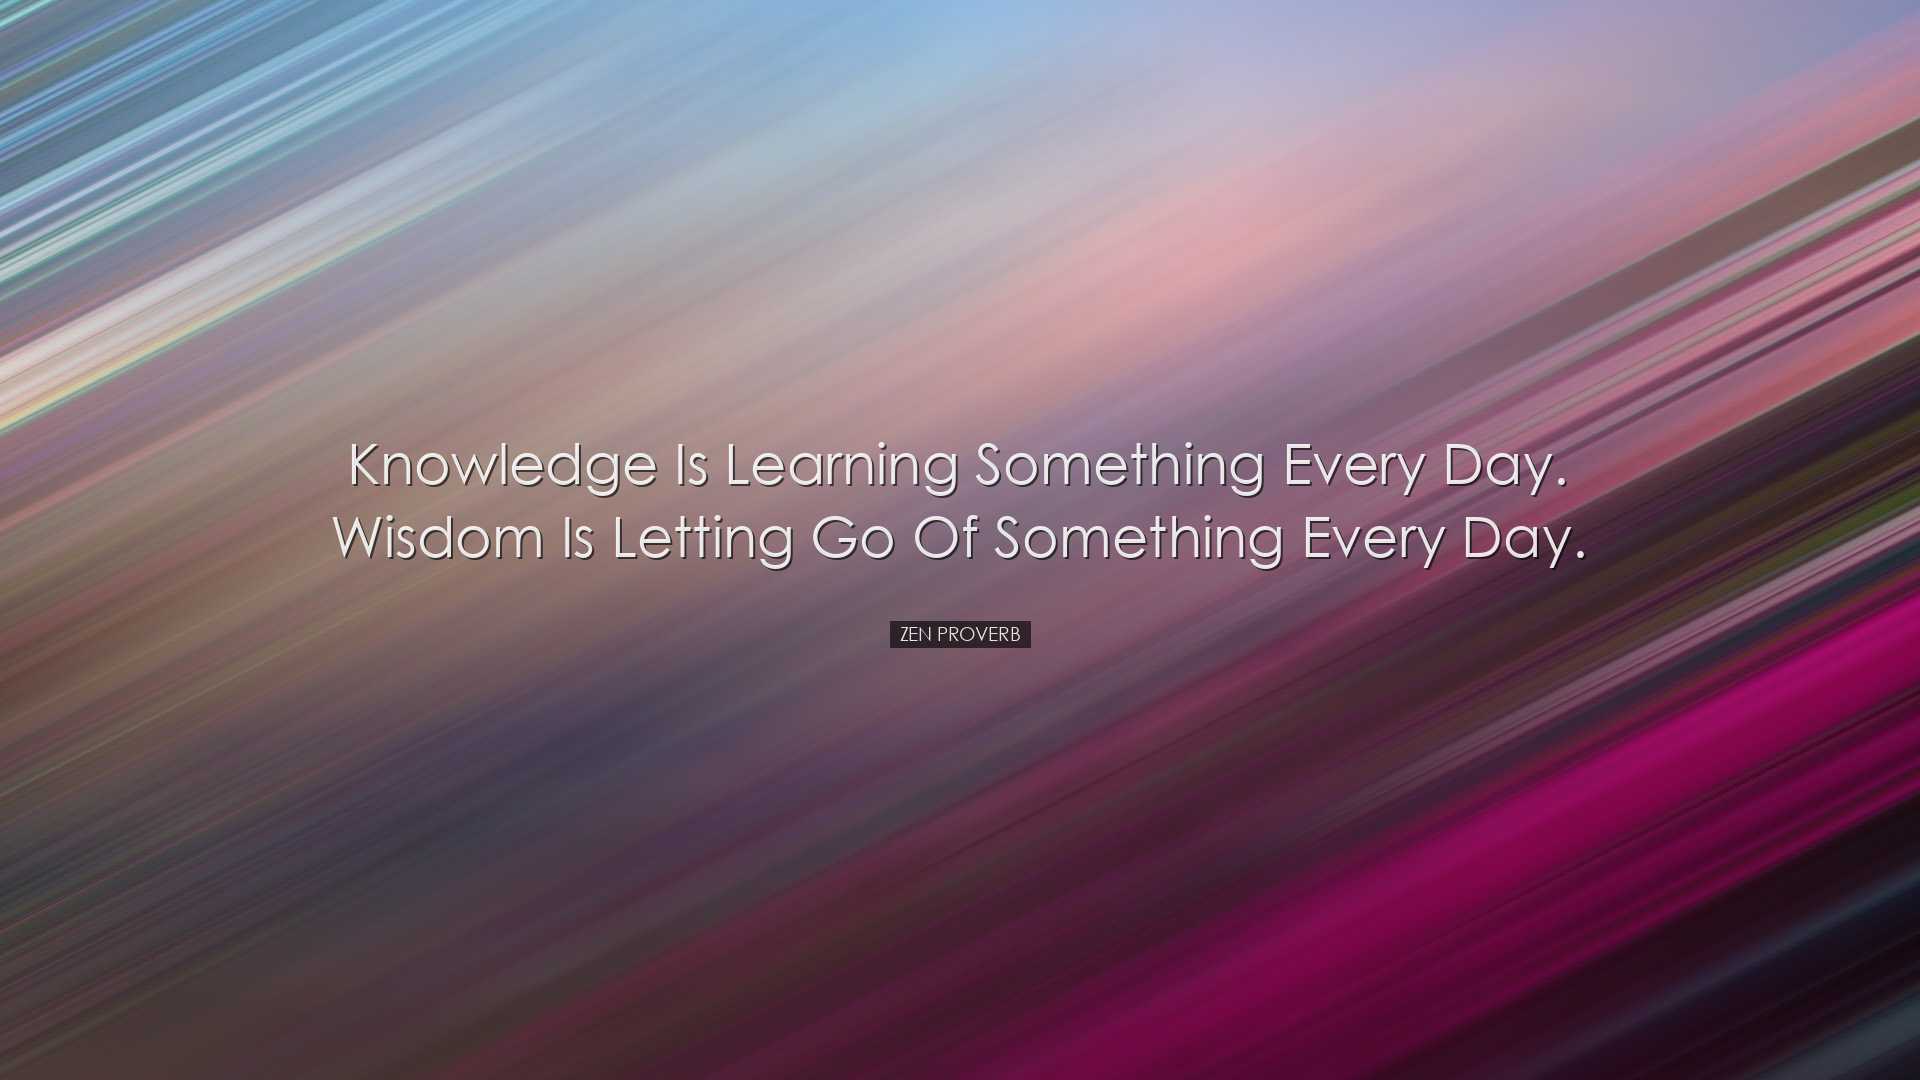 Knowledge is learning something every day. Wisdom is letting go of